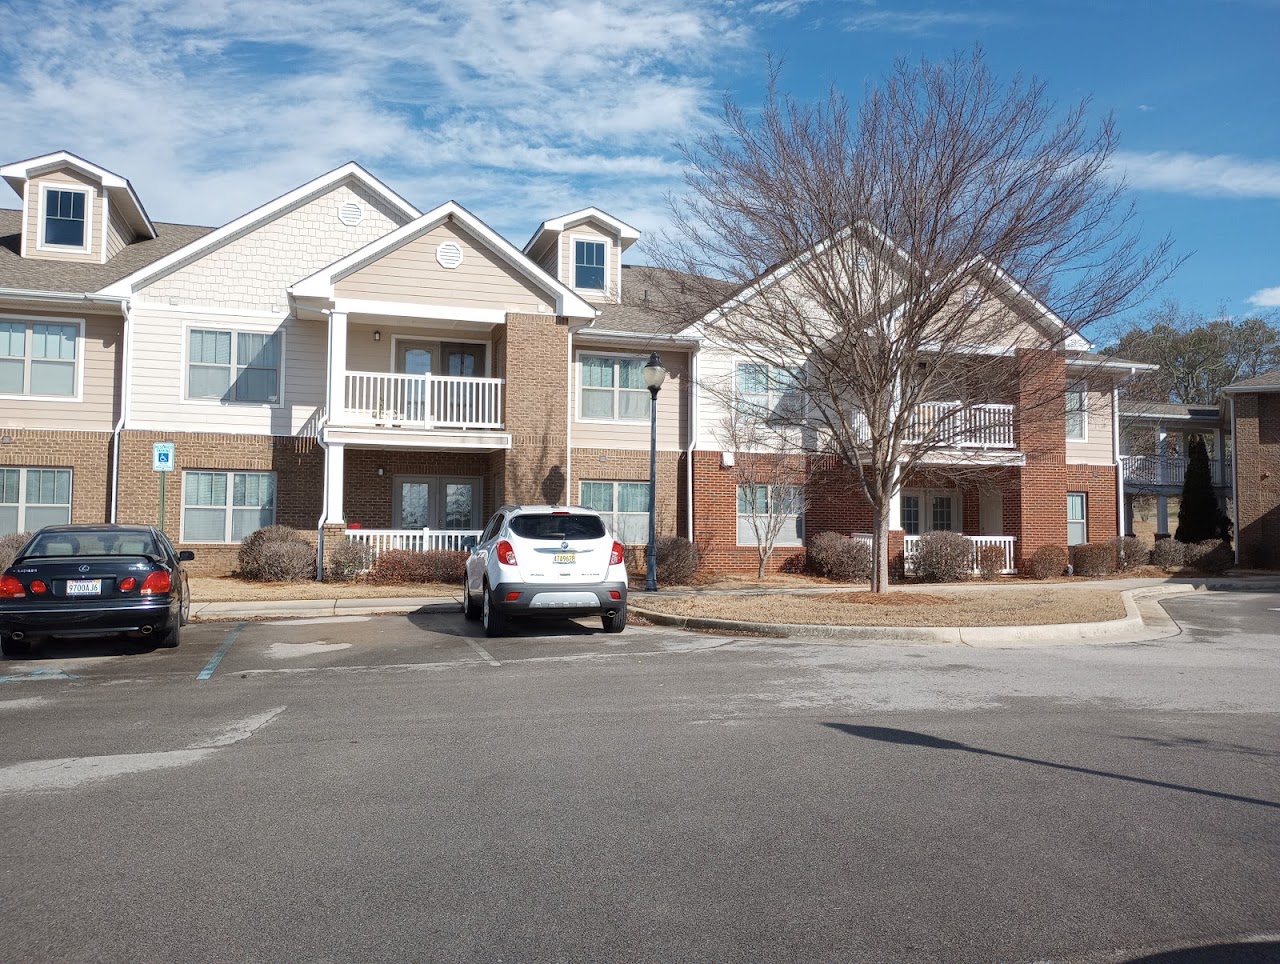 Photo of FRANKLIN HILLS. Affordable housing located at 5300 MILLENNIUM DR NW HUNTSVILLE, AL 35806